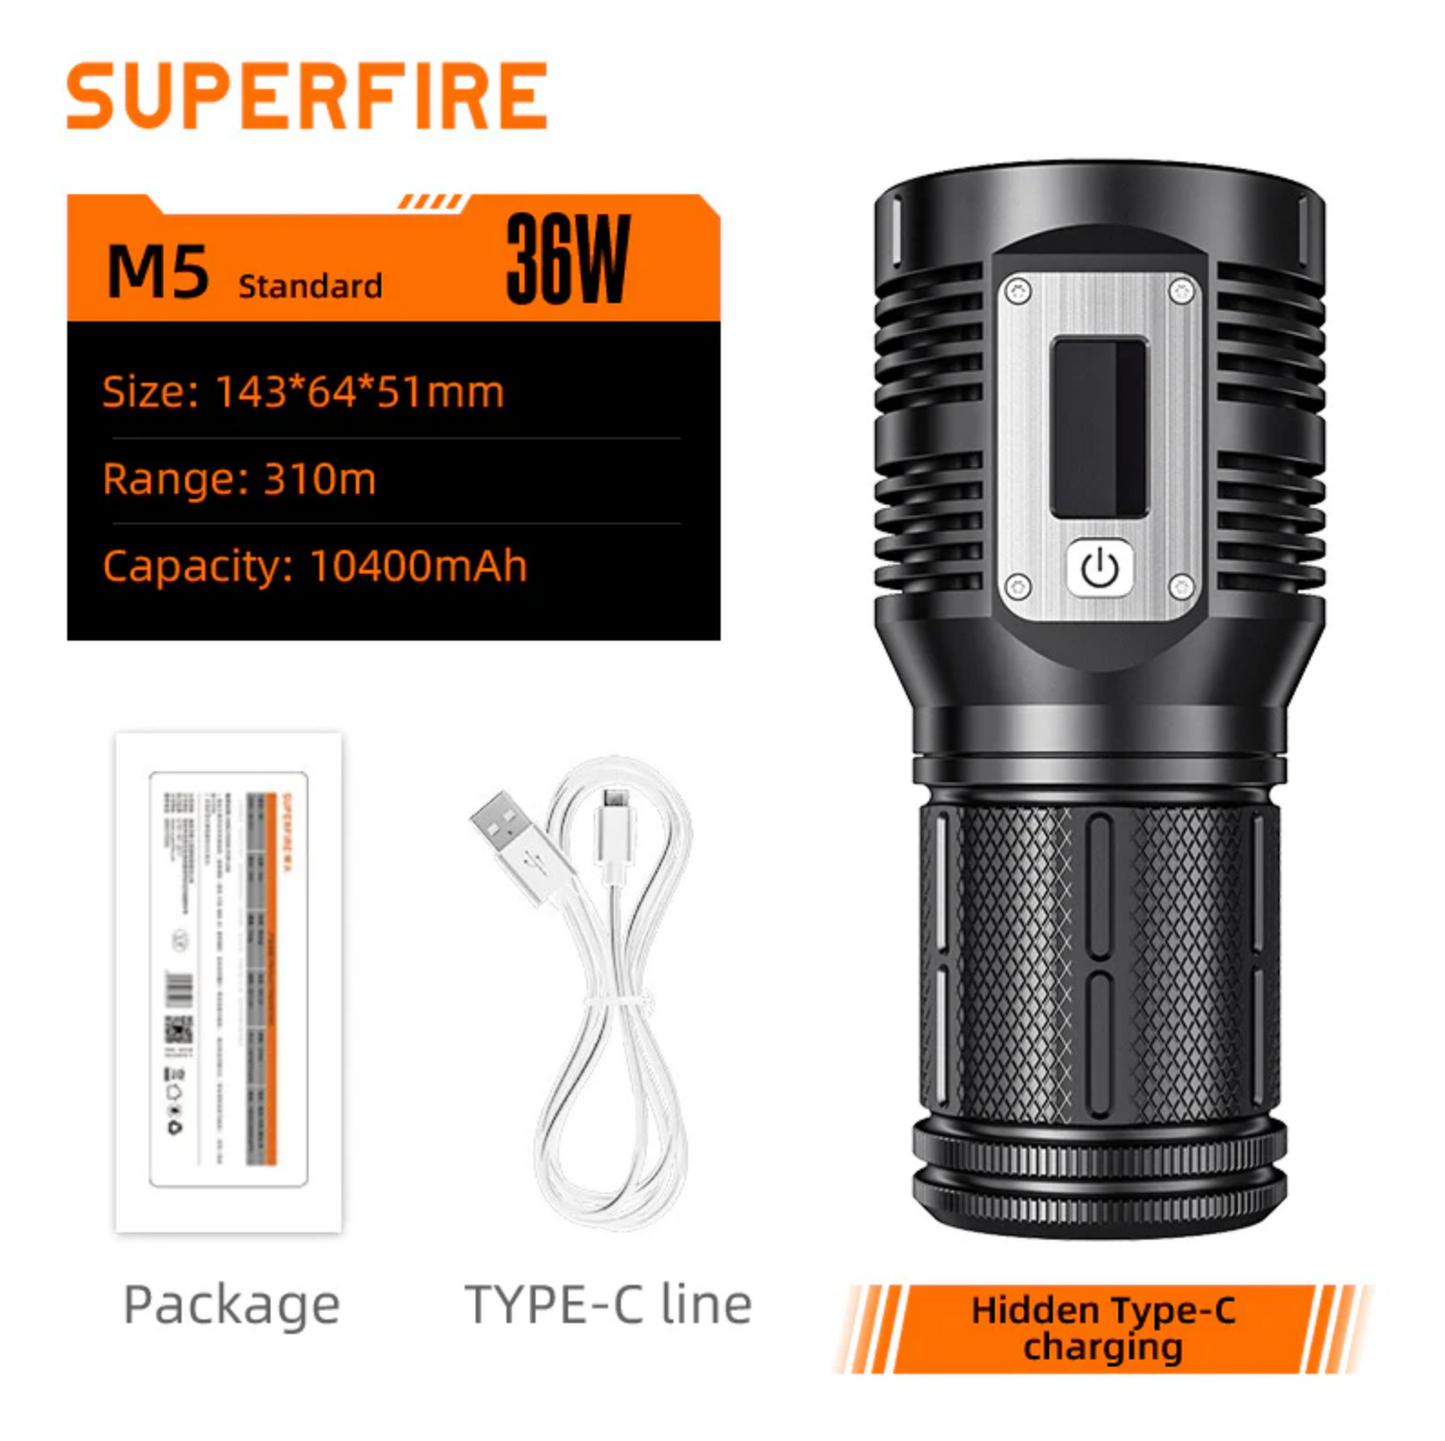 SuperFire M5 36Watt USB-C Rechargeable Flashlight with LED Display and Cell Phone Charging